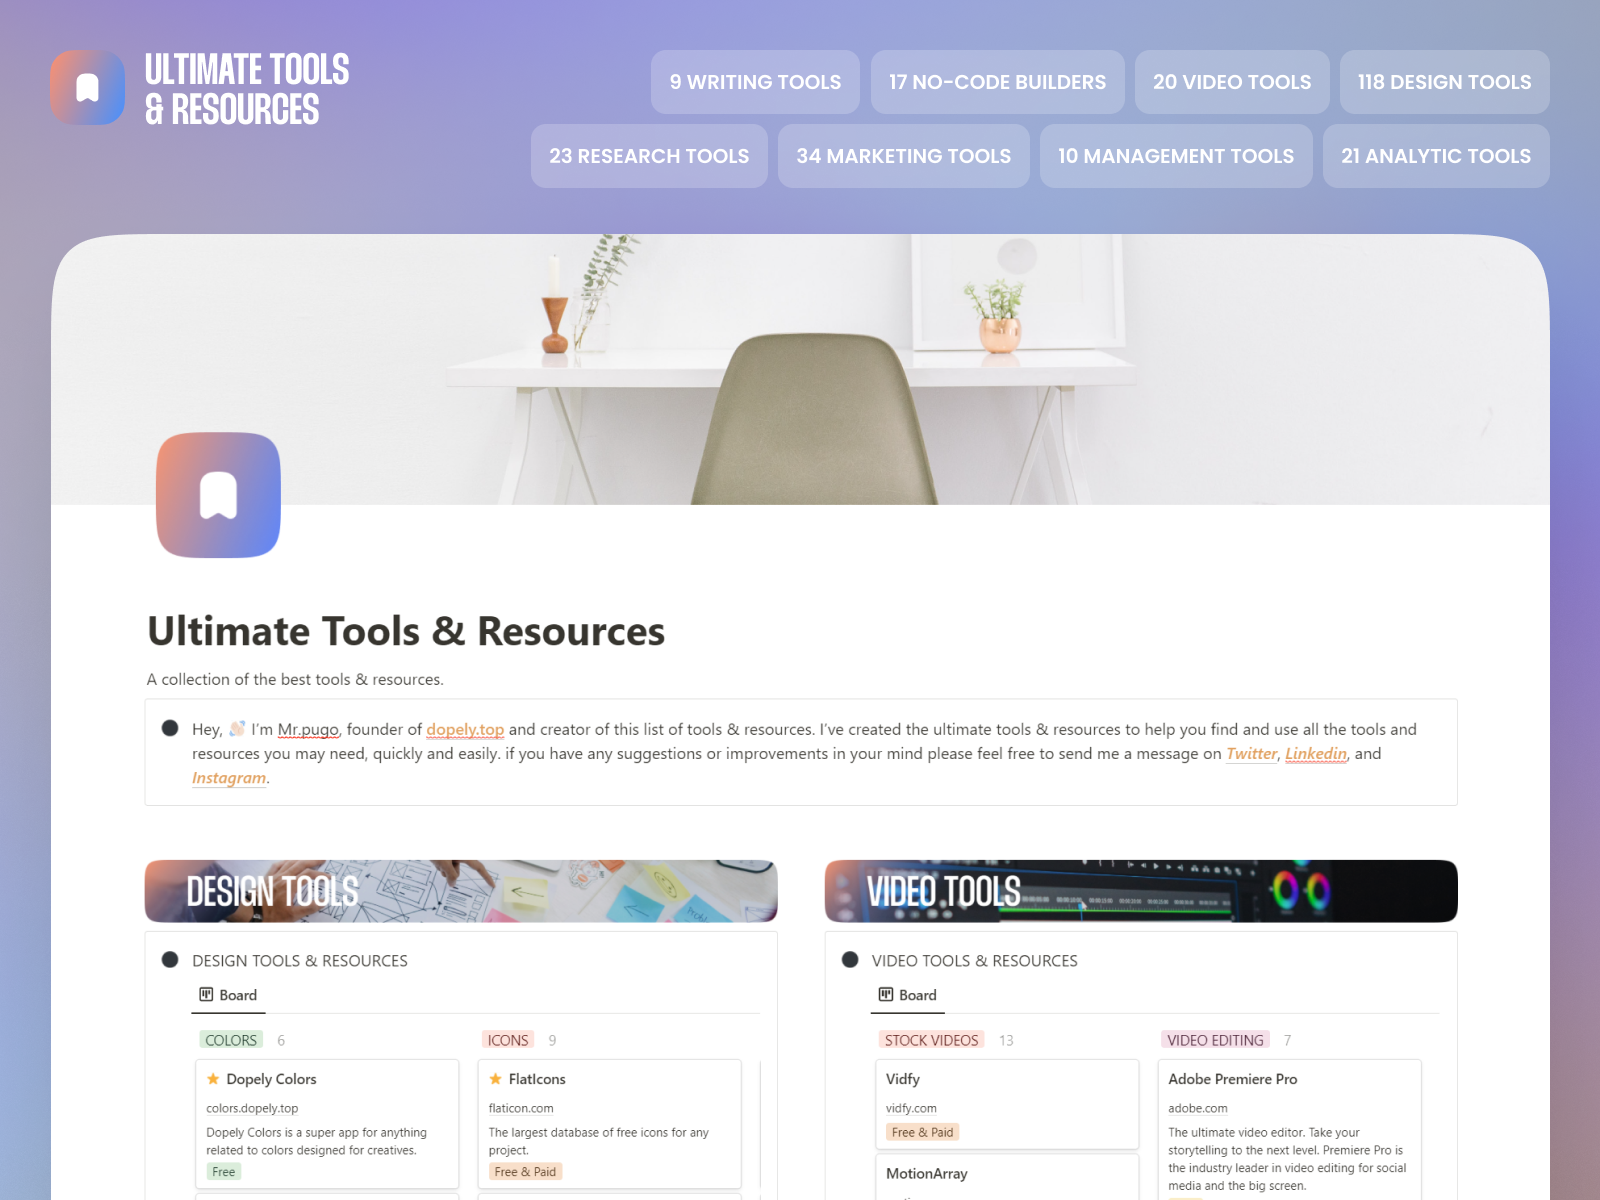 Ultimate Tools & Resources